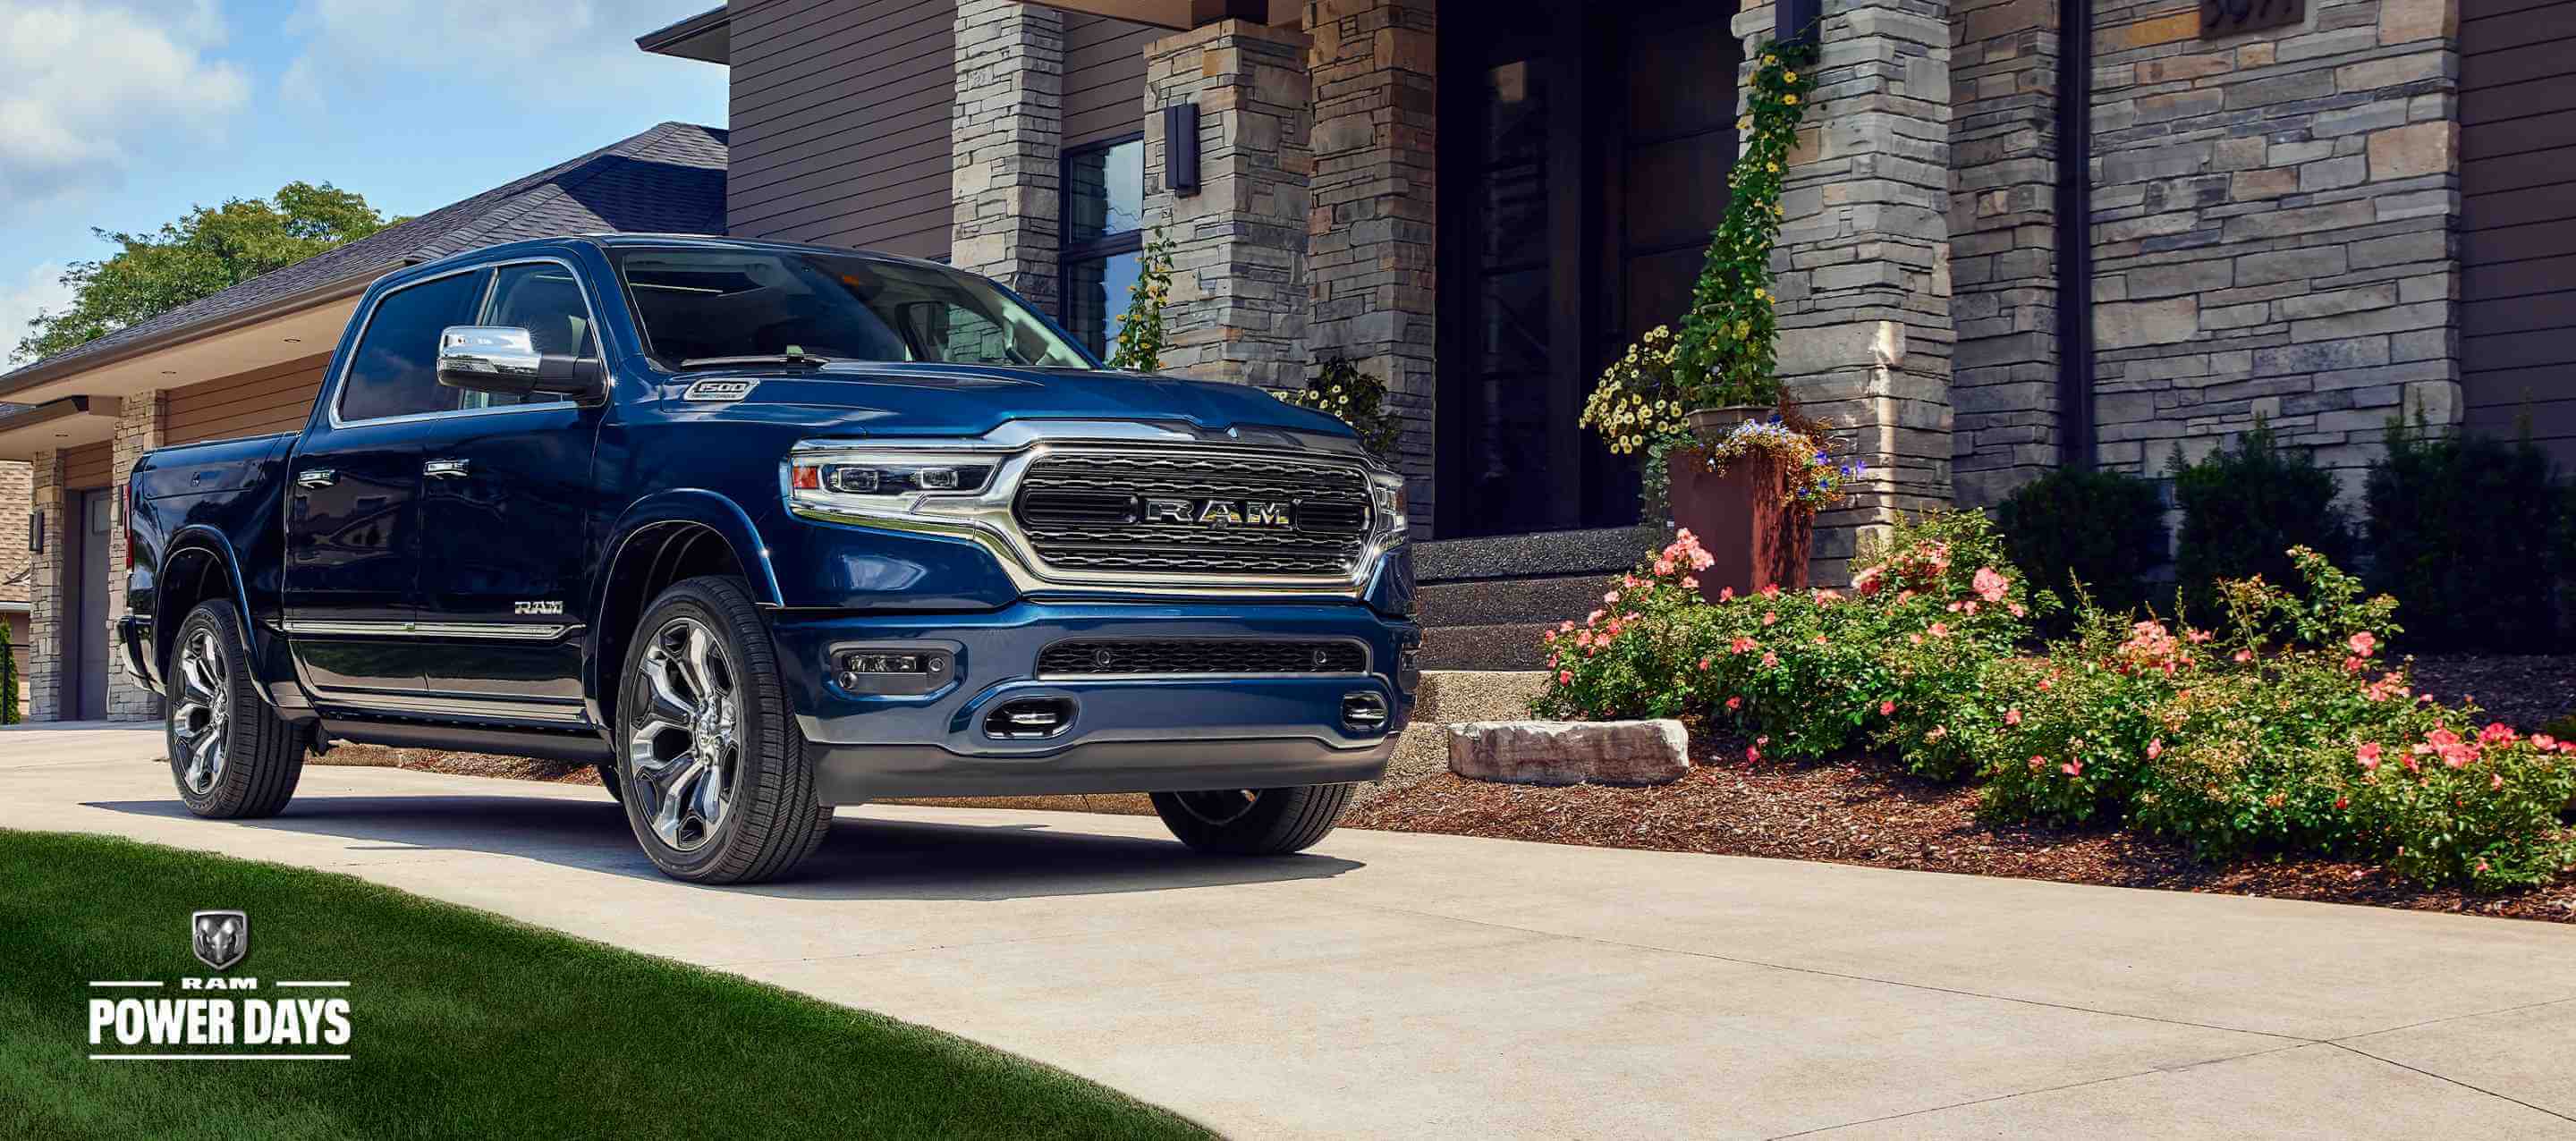 A front angled passenger-side profile of a blue 2024 Ram 1500 Limited Crew Cab parked in the driveway of a large home. Power Days Sales Event.